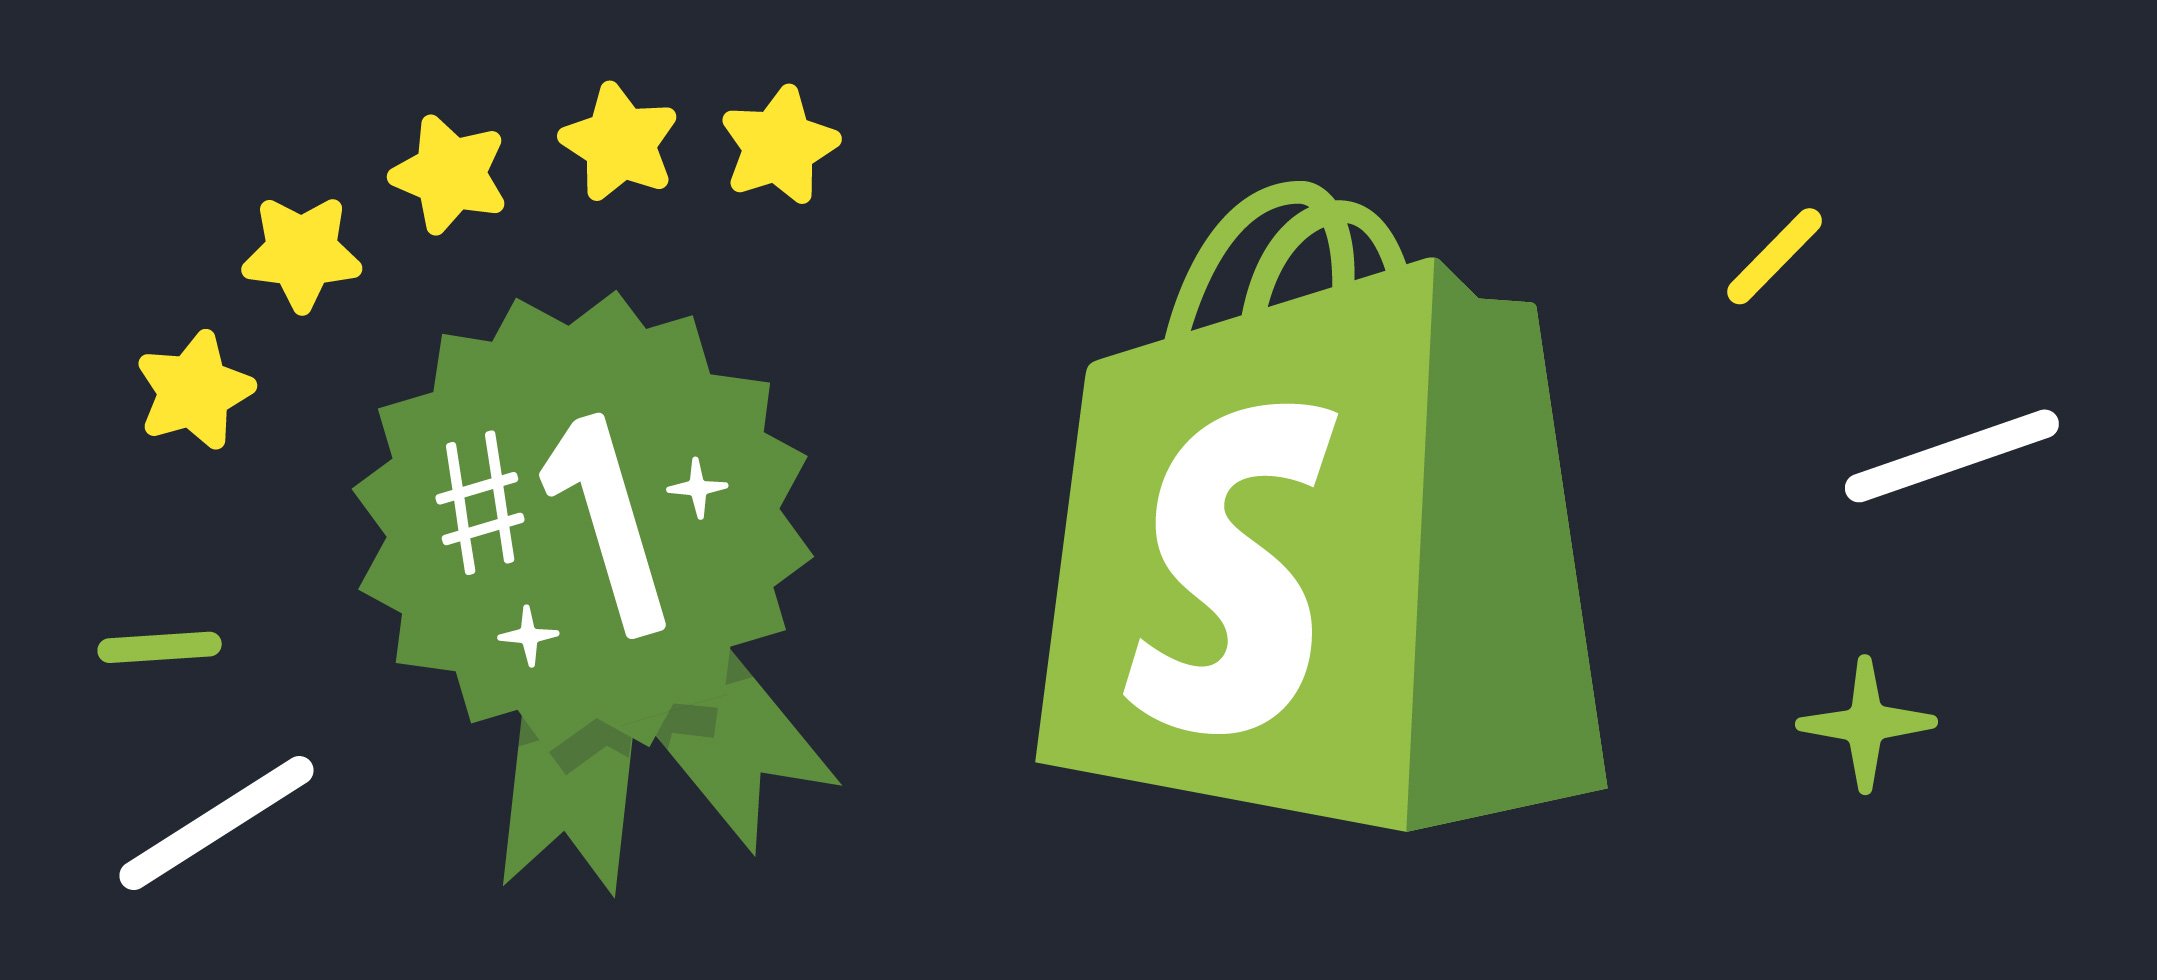 We will show you how to master Shopify for the first time